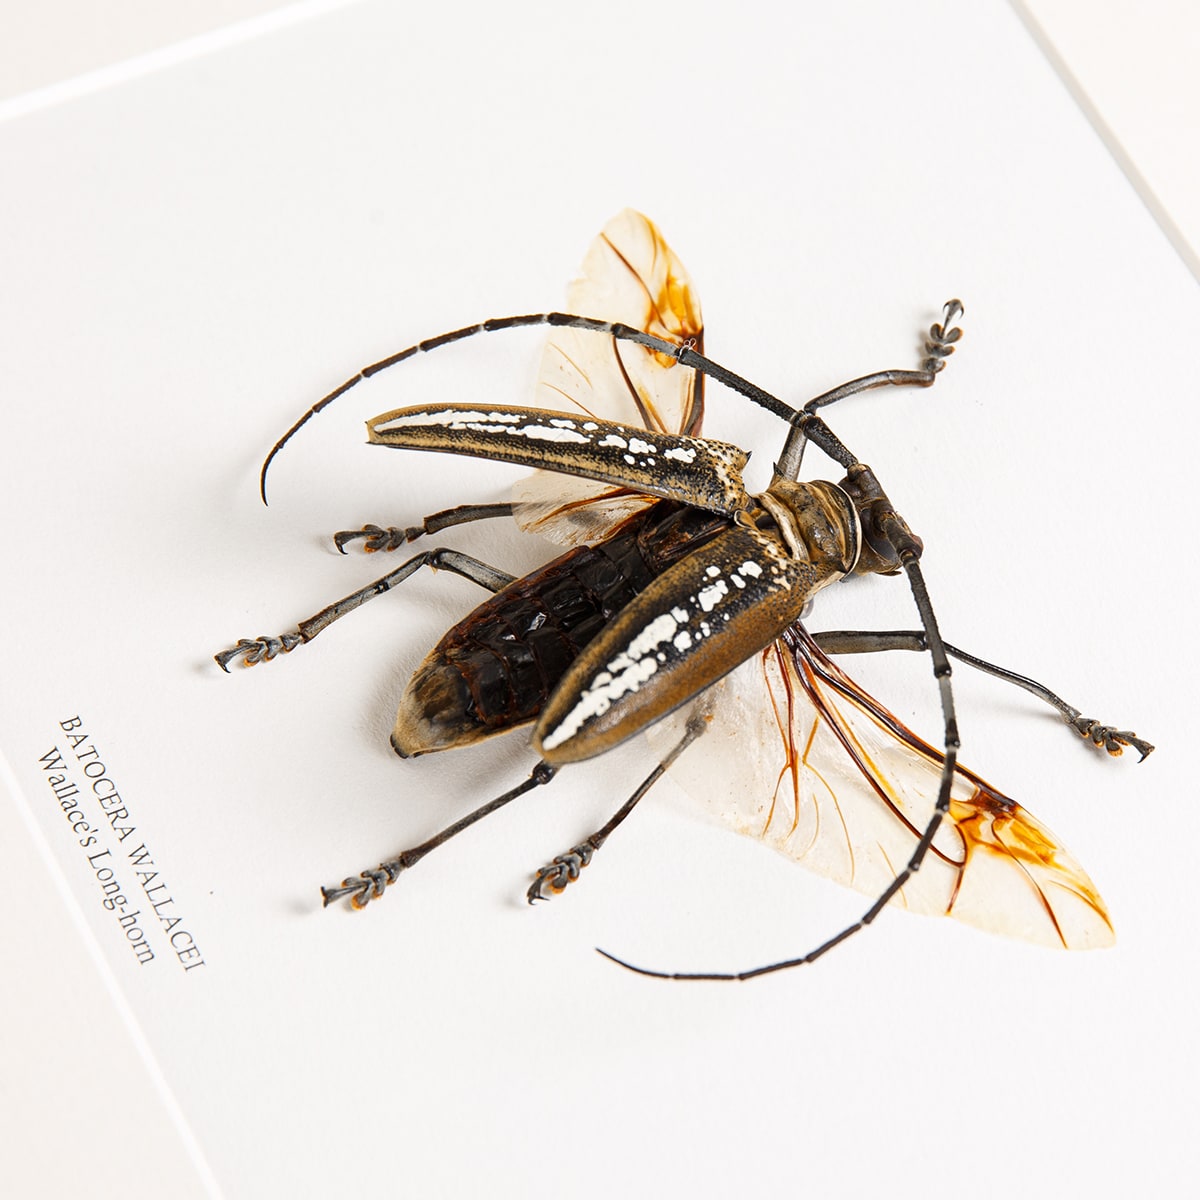 Wallace's Long-horn Beetle With Wings Spread in Box Frame (Batocera wallacei)